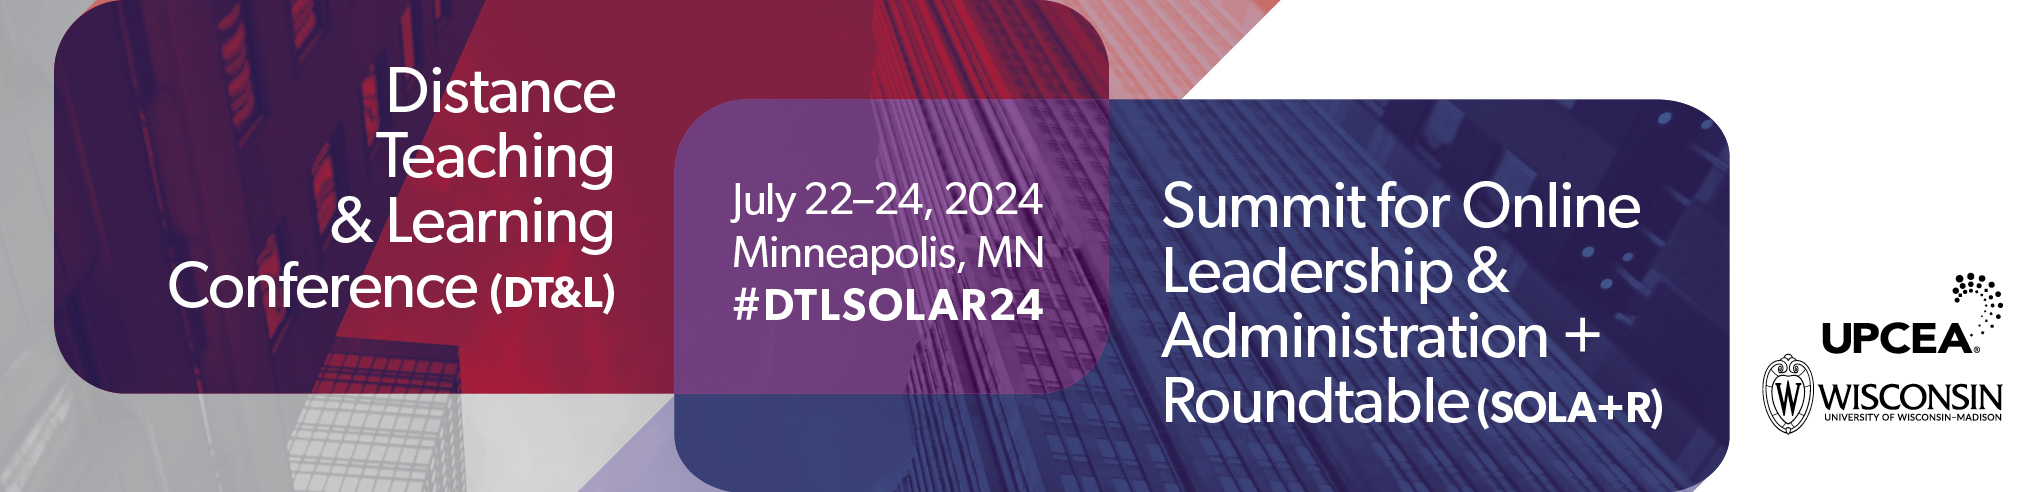 The Summit for Online Leadership & Administration + Roundtable (SOLA+R) and Distance Teaching and Learning Conference (DT&L) | July 22-24, 2024 | Minneapolis, MN